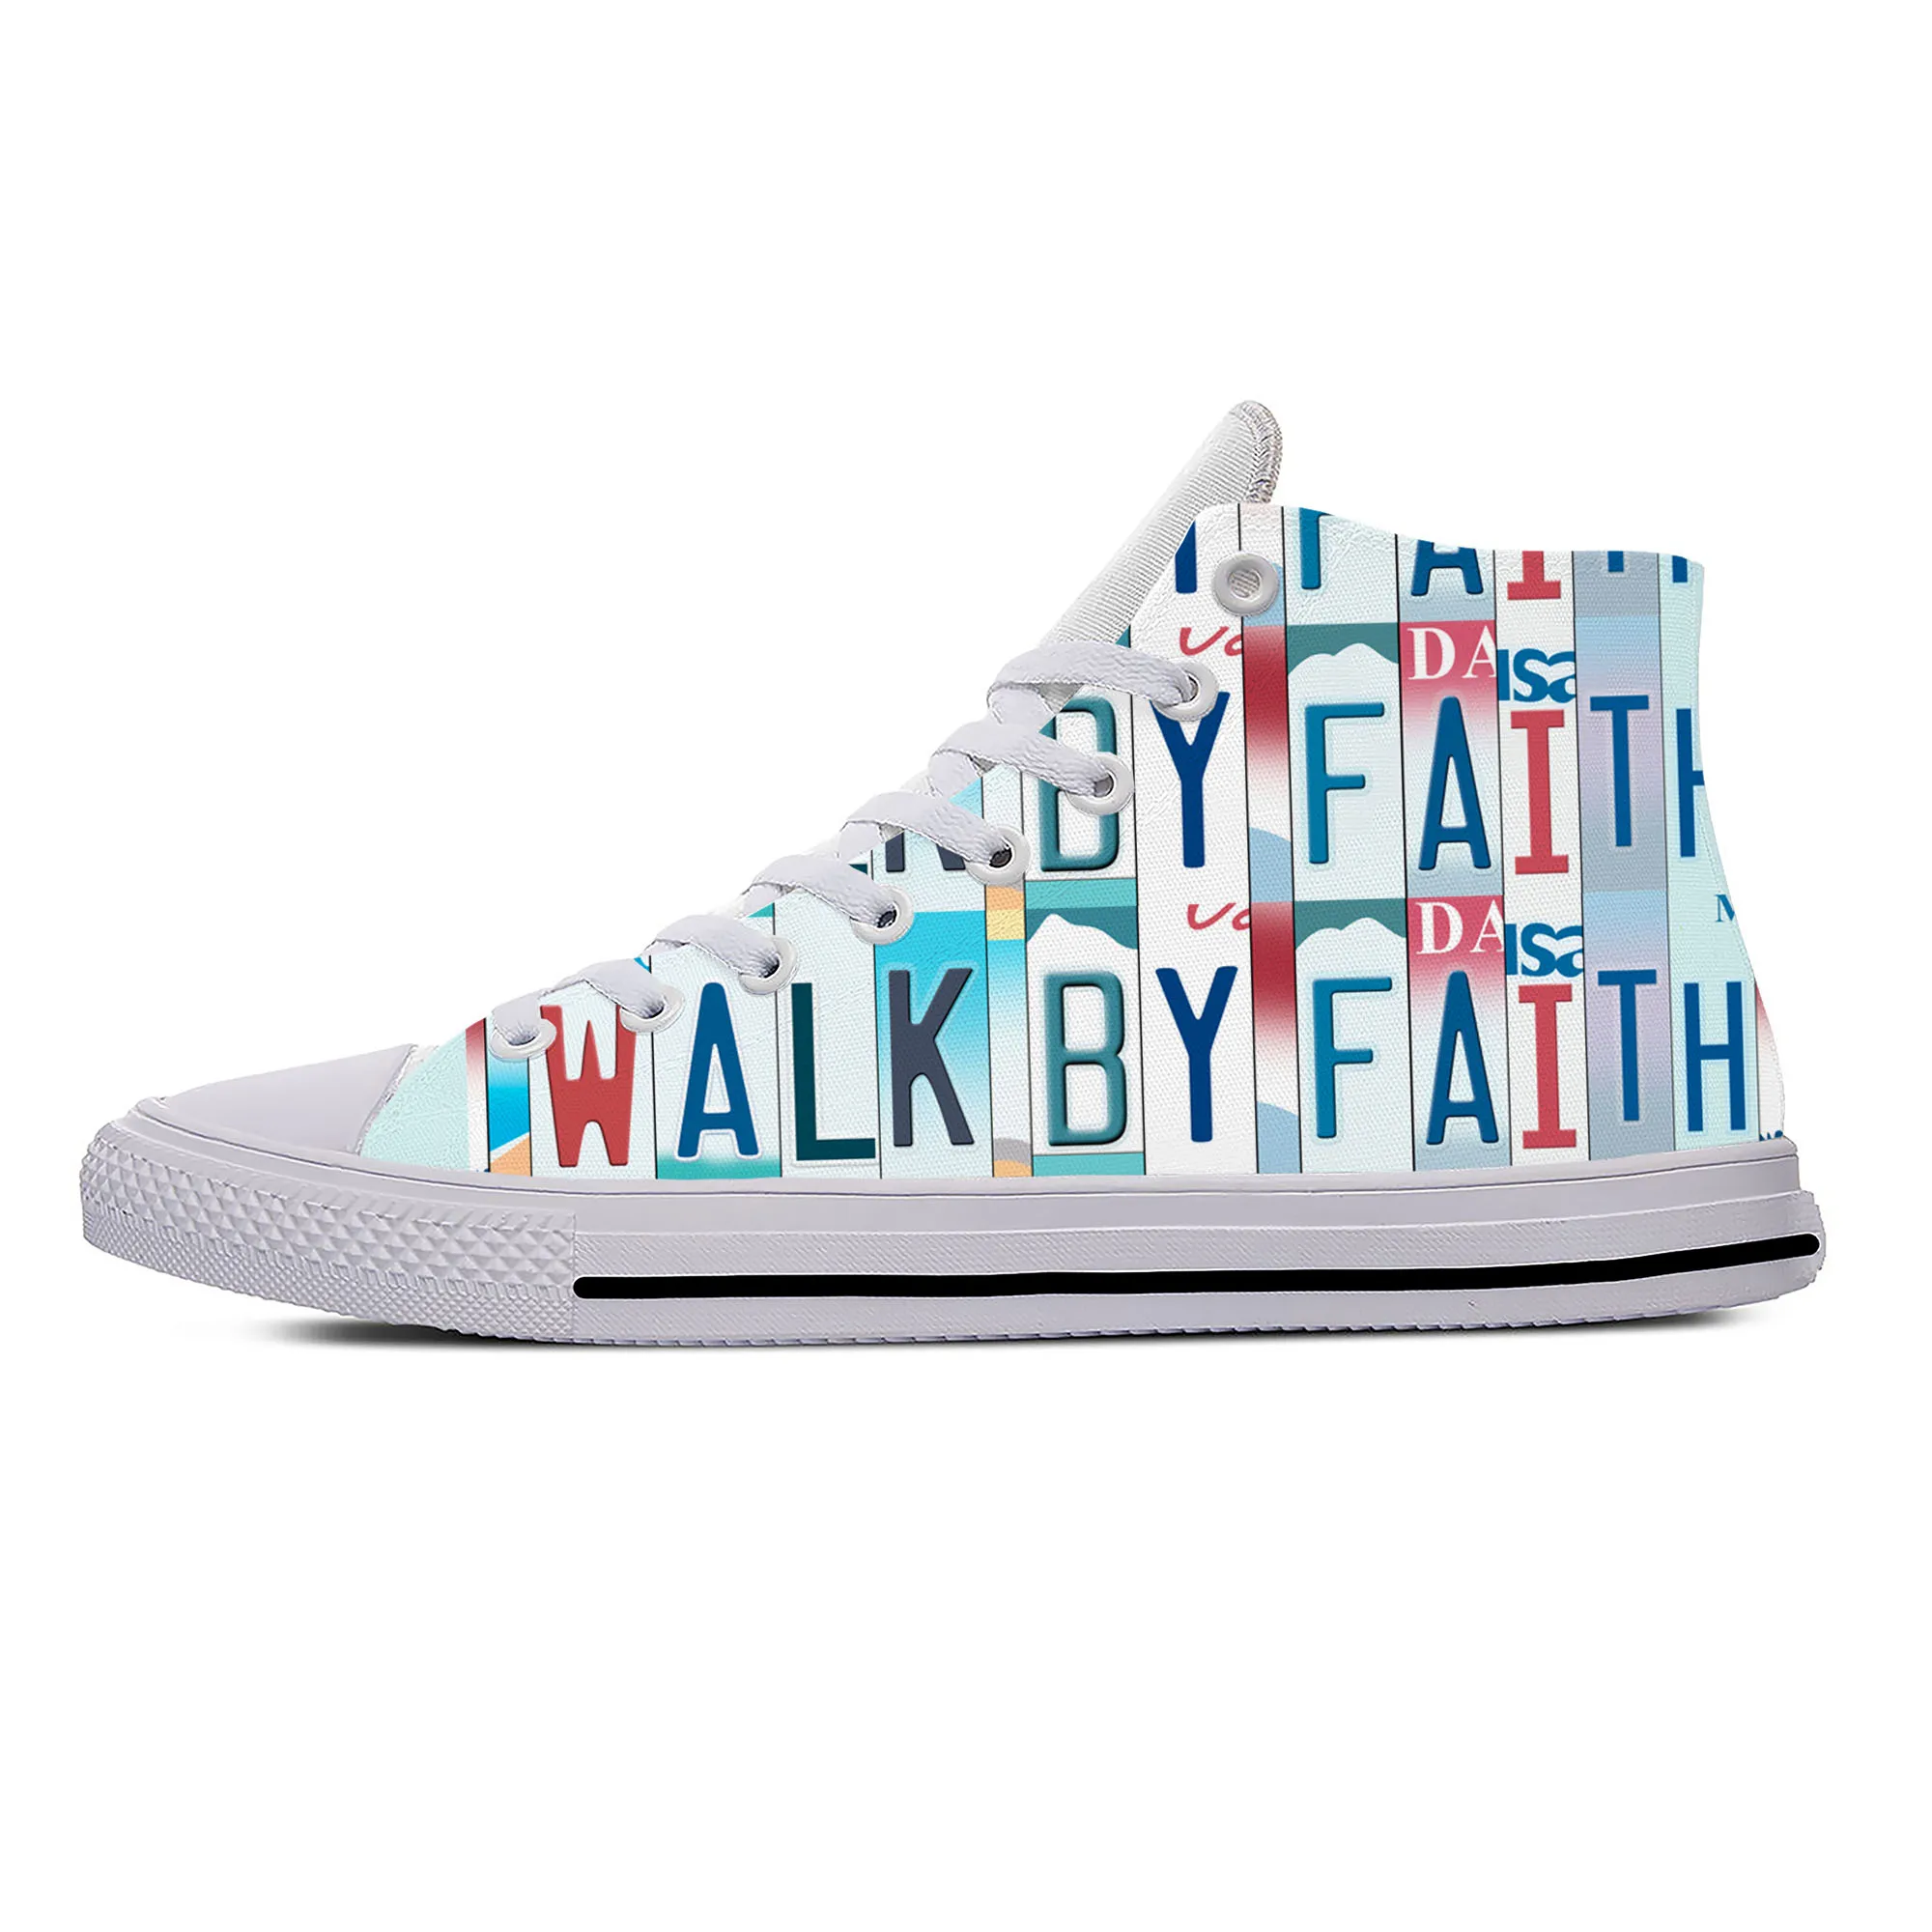 

Walk By Faith High Top Sneakers Mens Womens Teenager Casual Shoes Canvas Running Shoes 3D Print Breathable Lightweight shoe